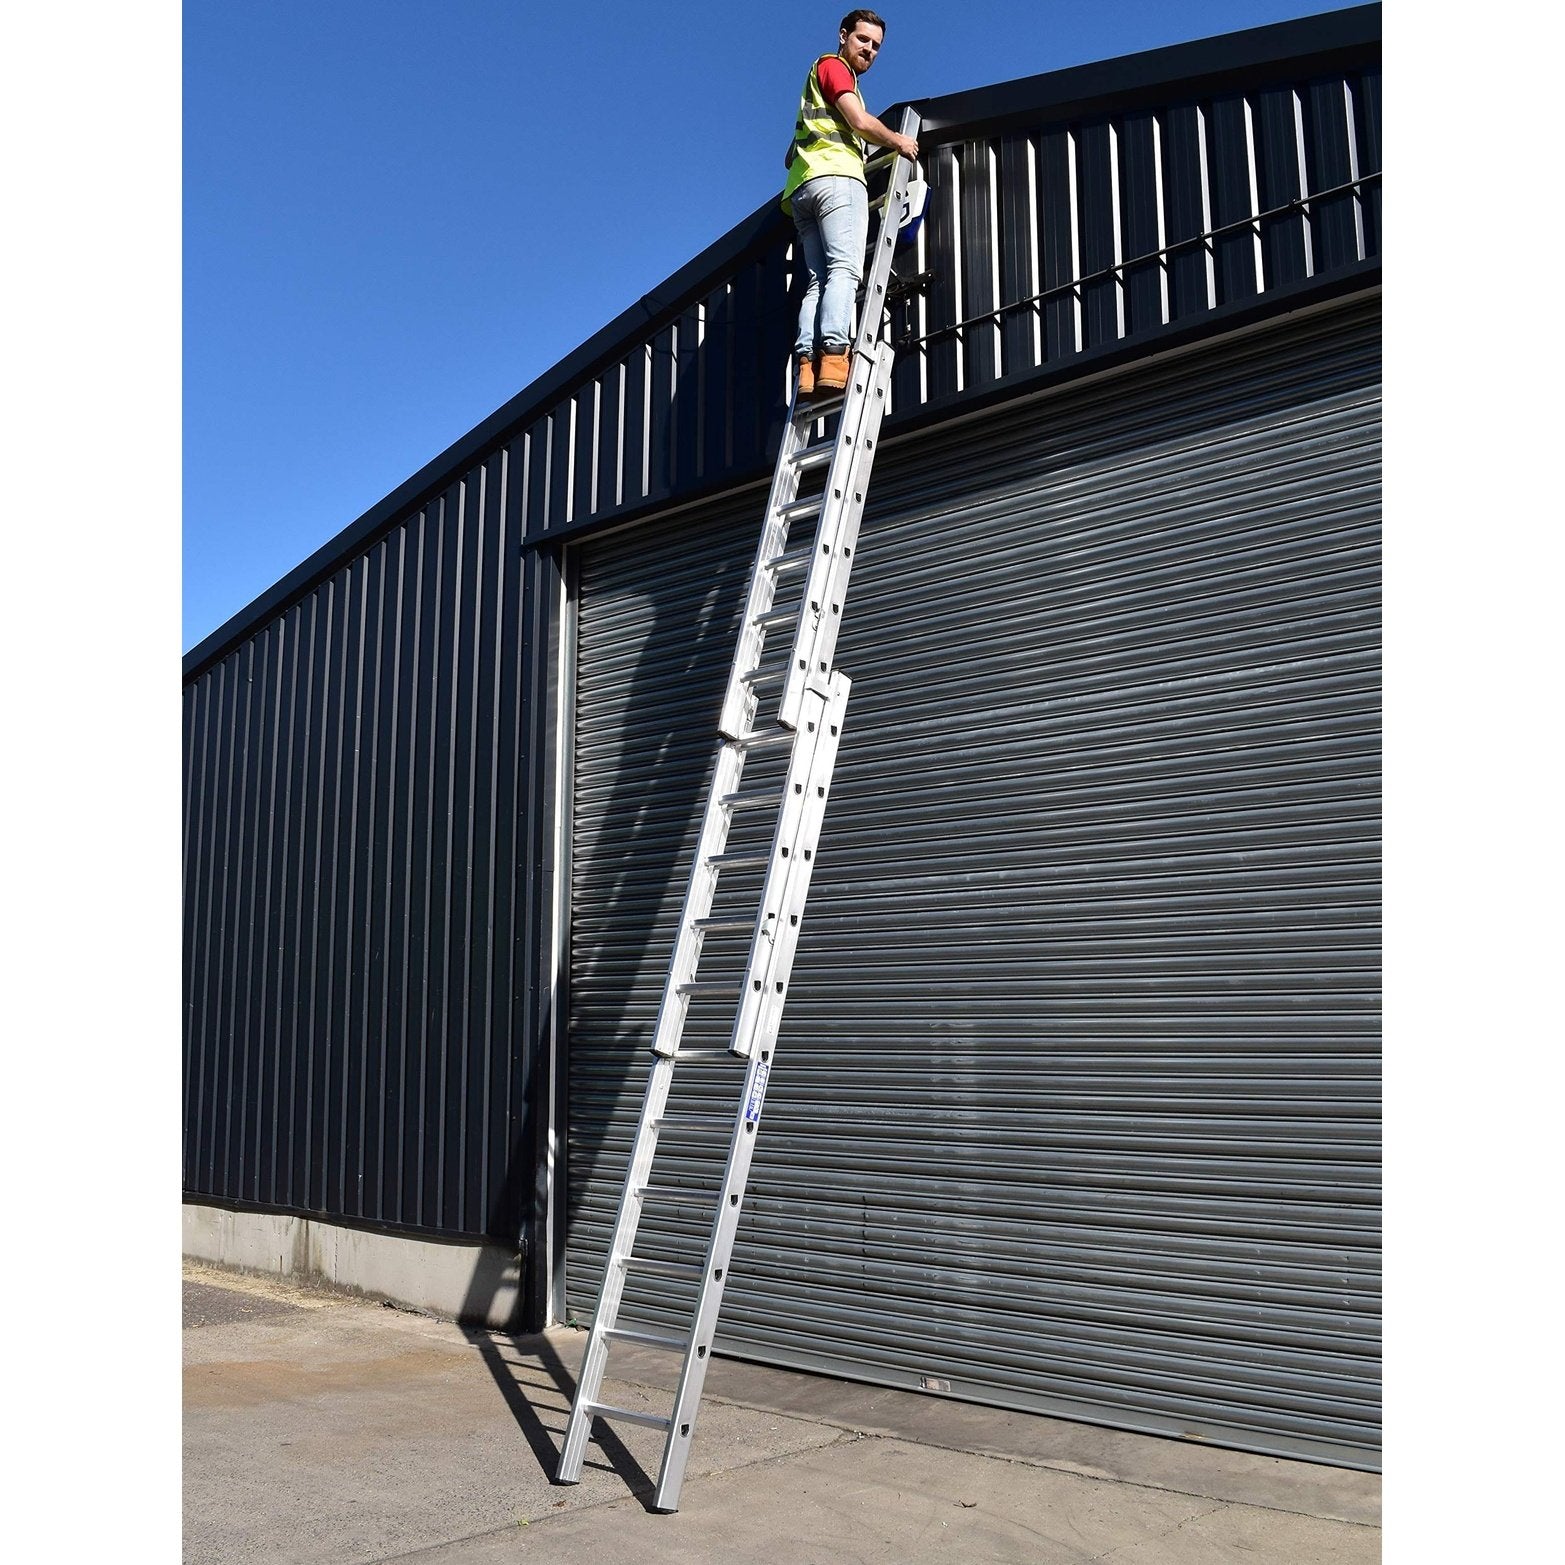 Ingco 3 Section Extension Ladder - HLAD03391 | Supply Master | Accra, Ghana Ladder Buy Tools hardware Building materials